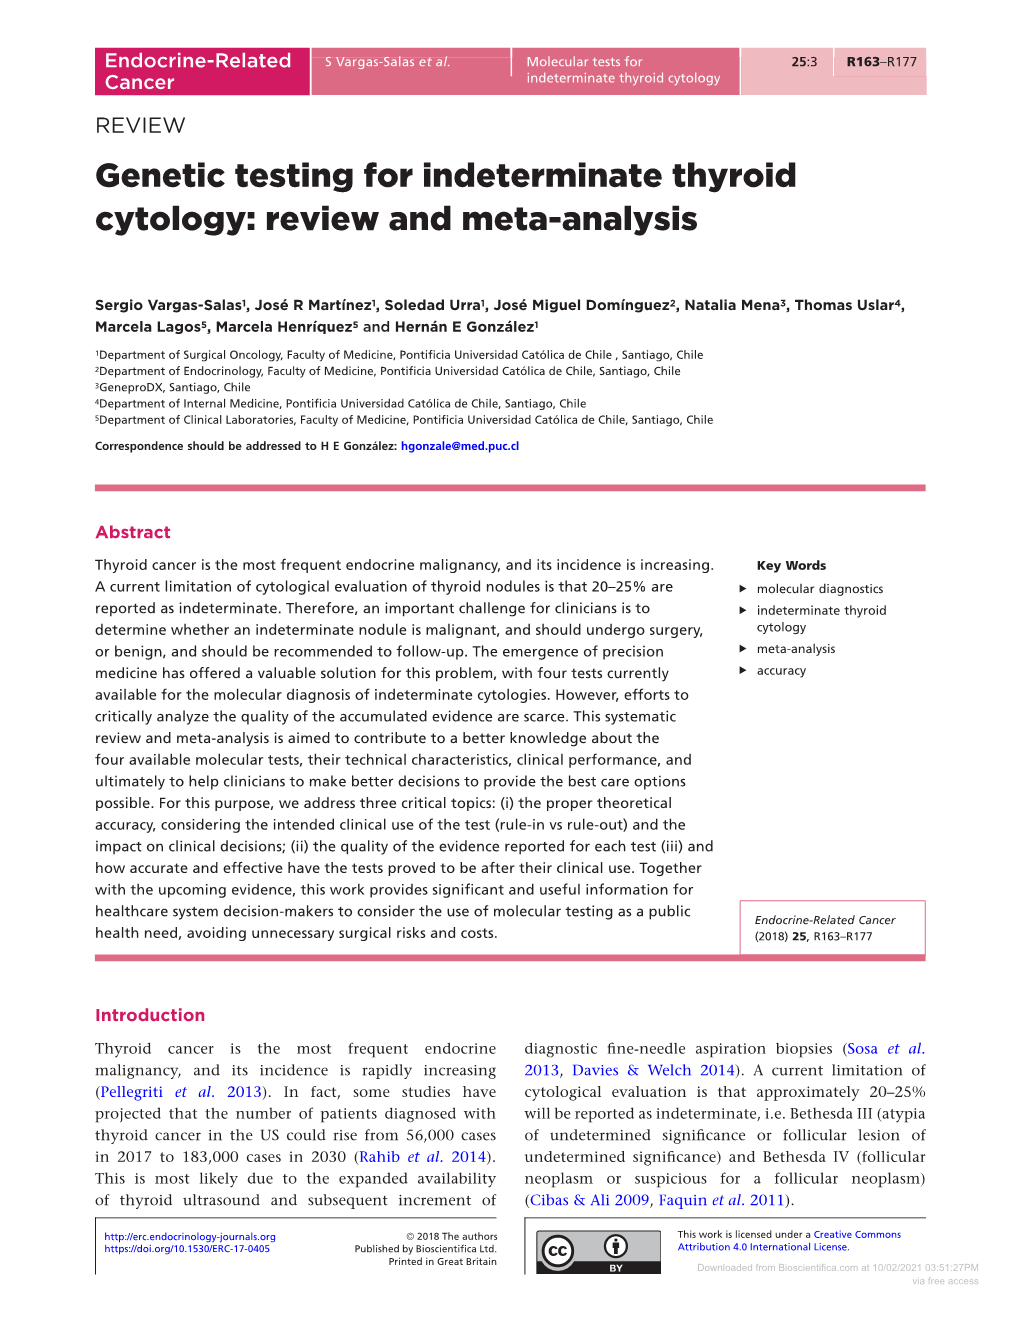 Genetic Testing for Indeterminate Thyroid Cytology: Review and Meta-Analysis